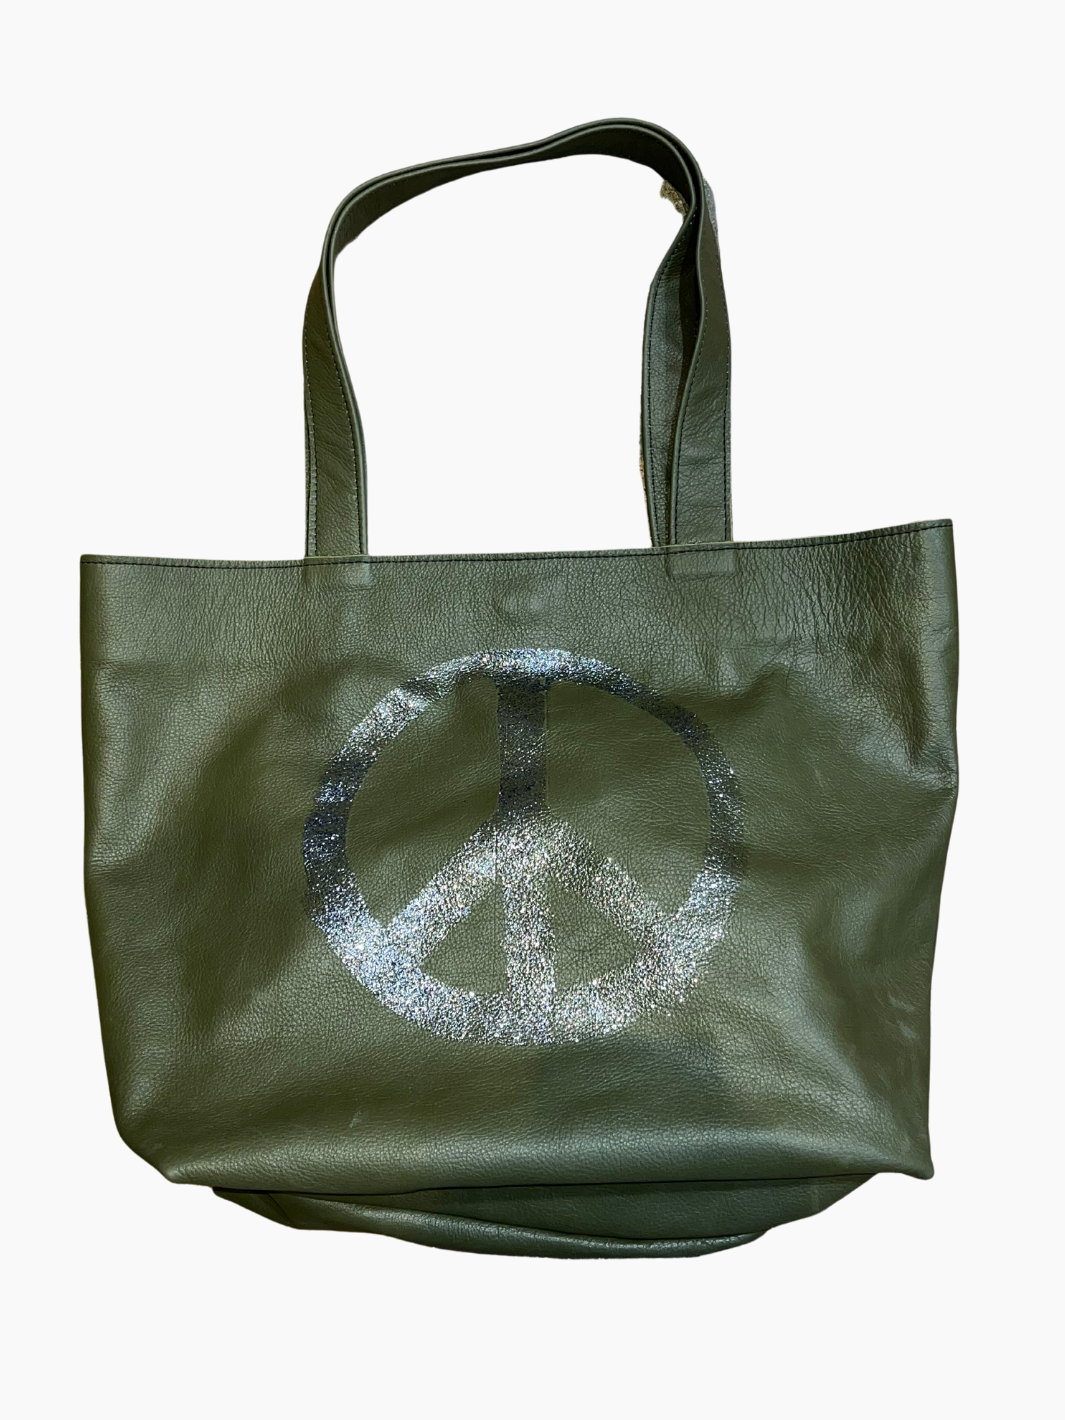 IZZI PEACE TOTE IN ARMY GREEN LEATHER - Romi Boutique